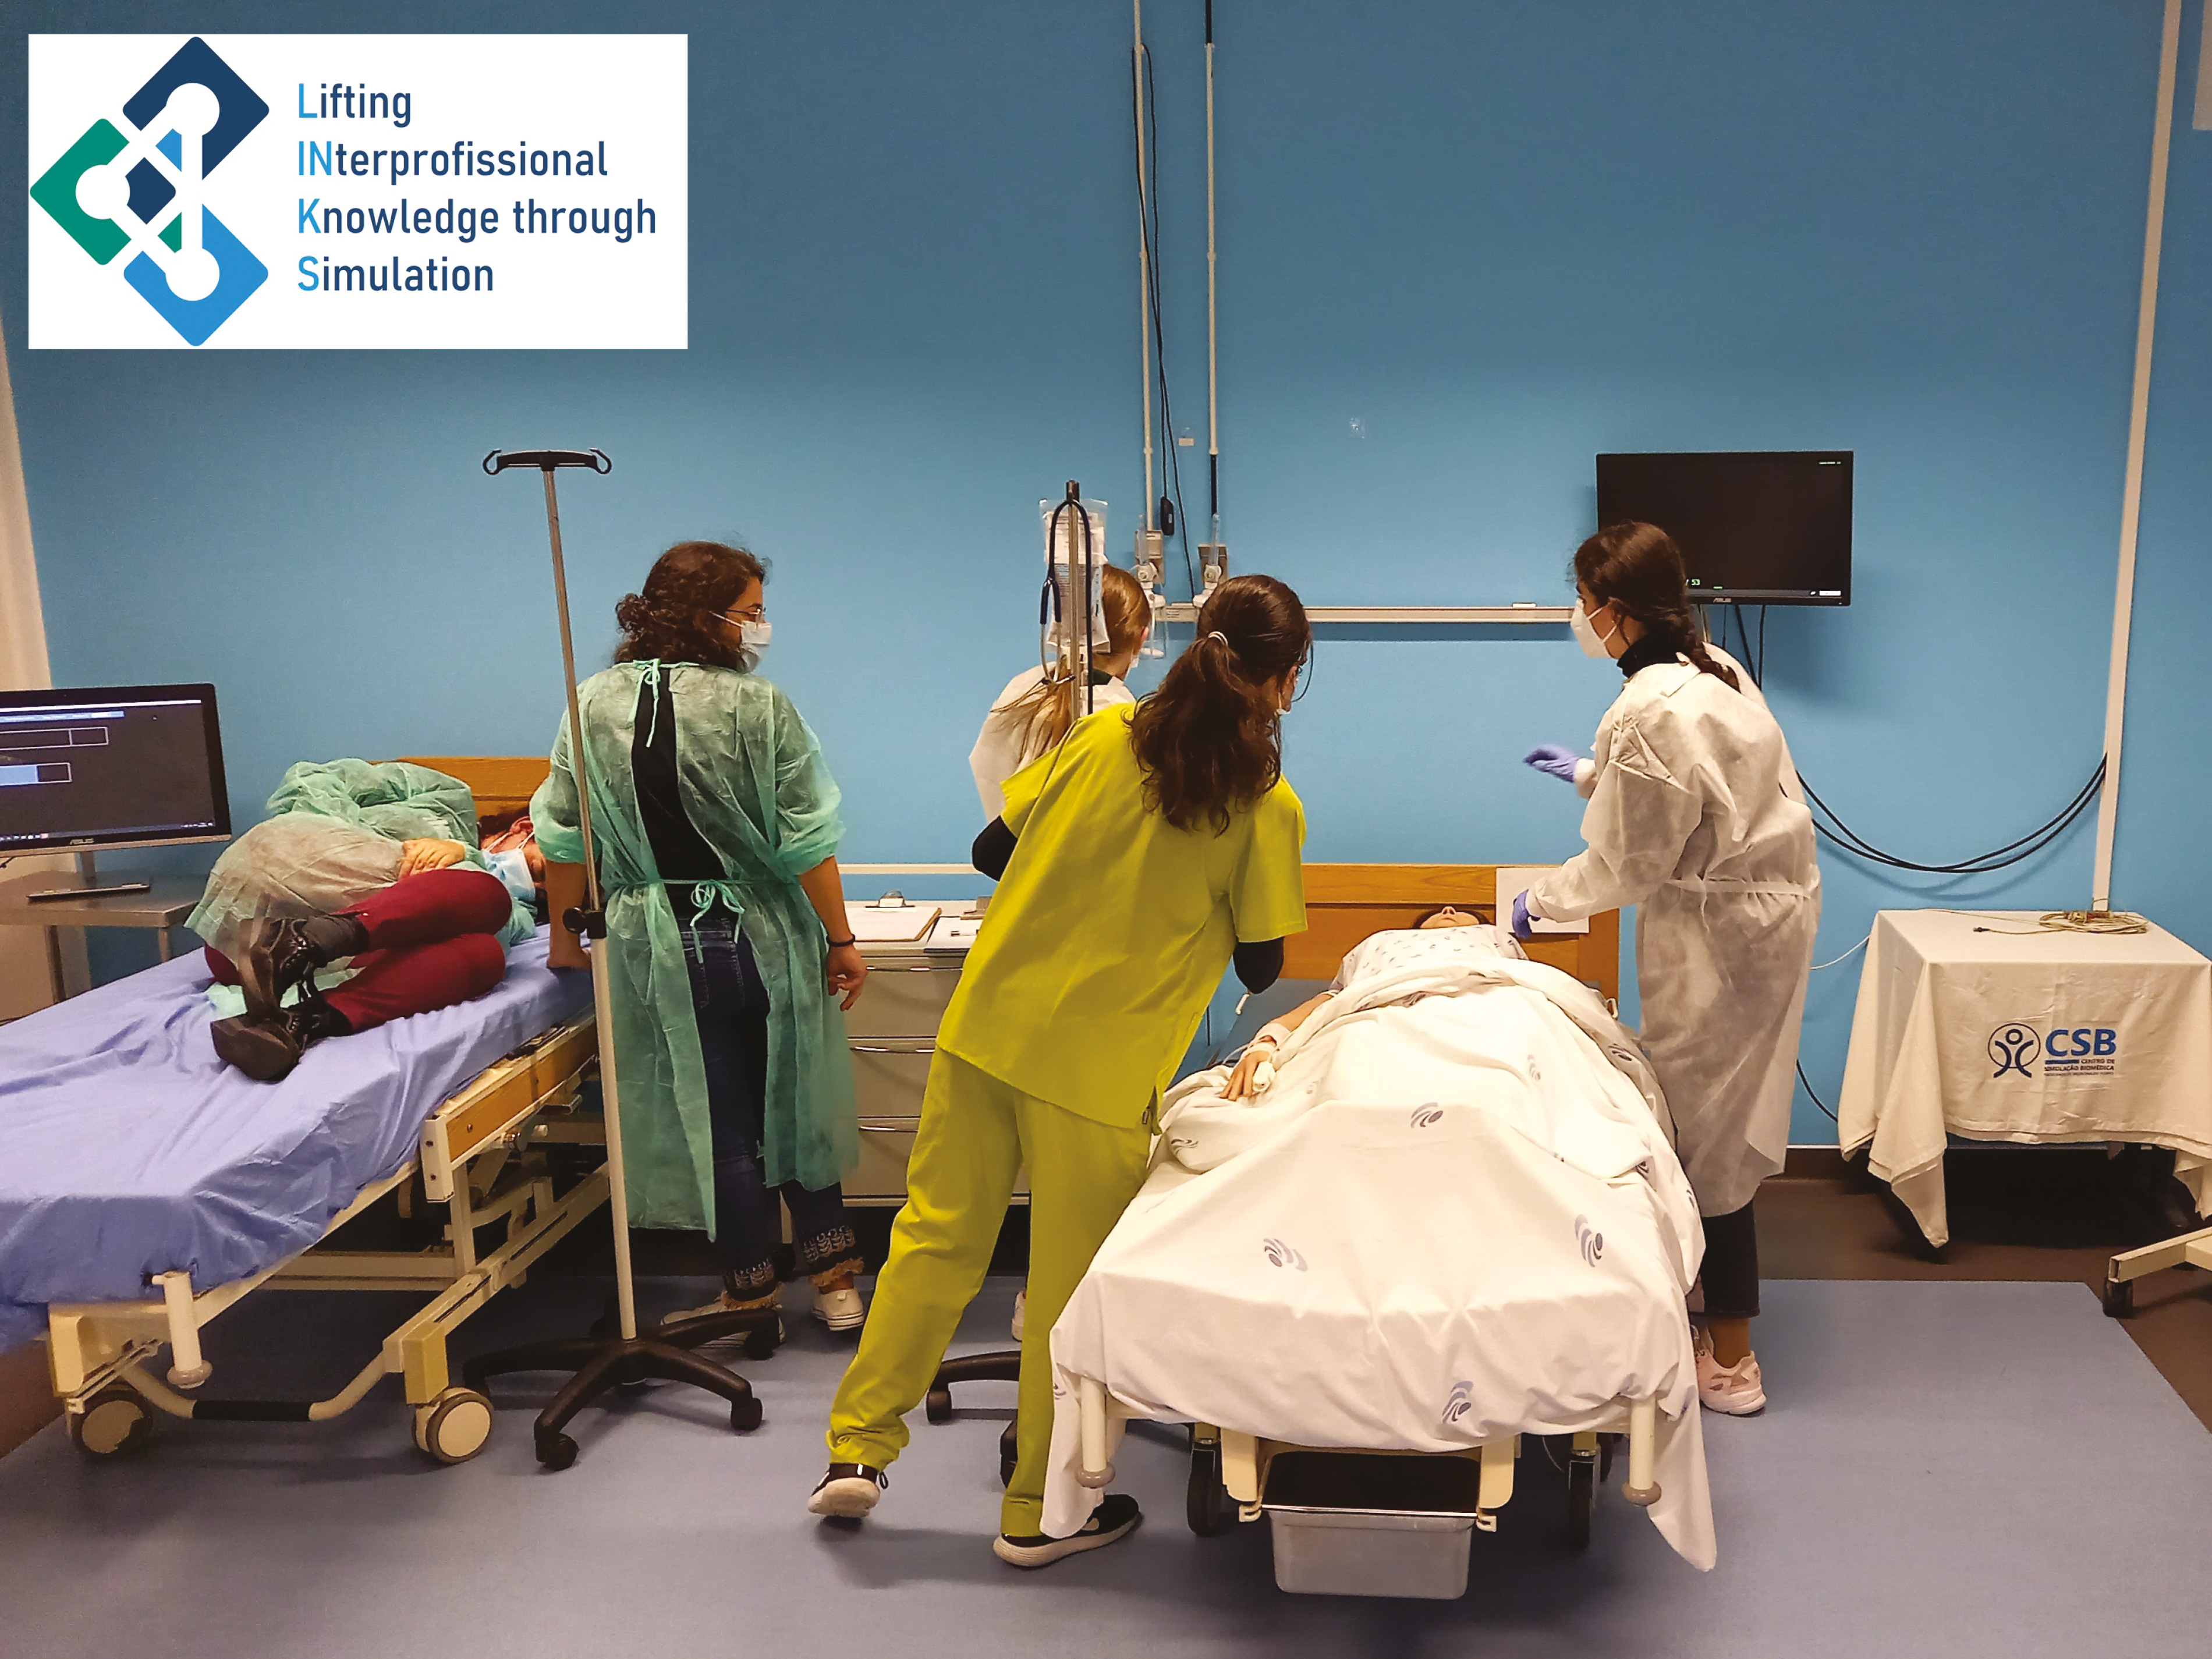 Illustrative image of a simulation scenario (multi-patient setting) during one session of the workshop.